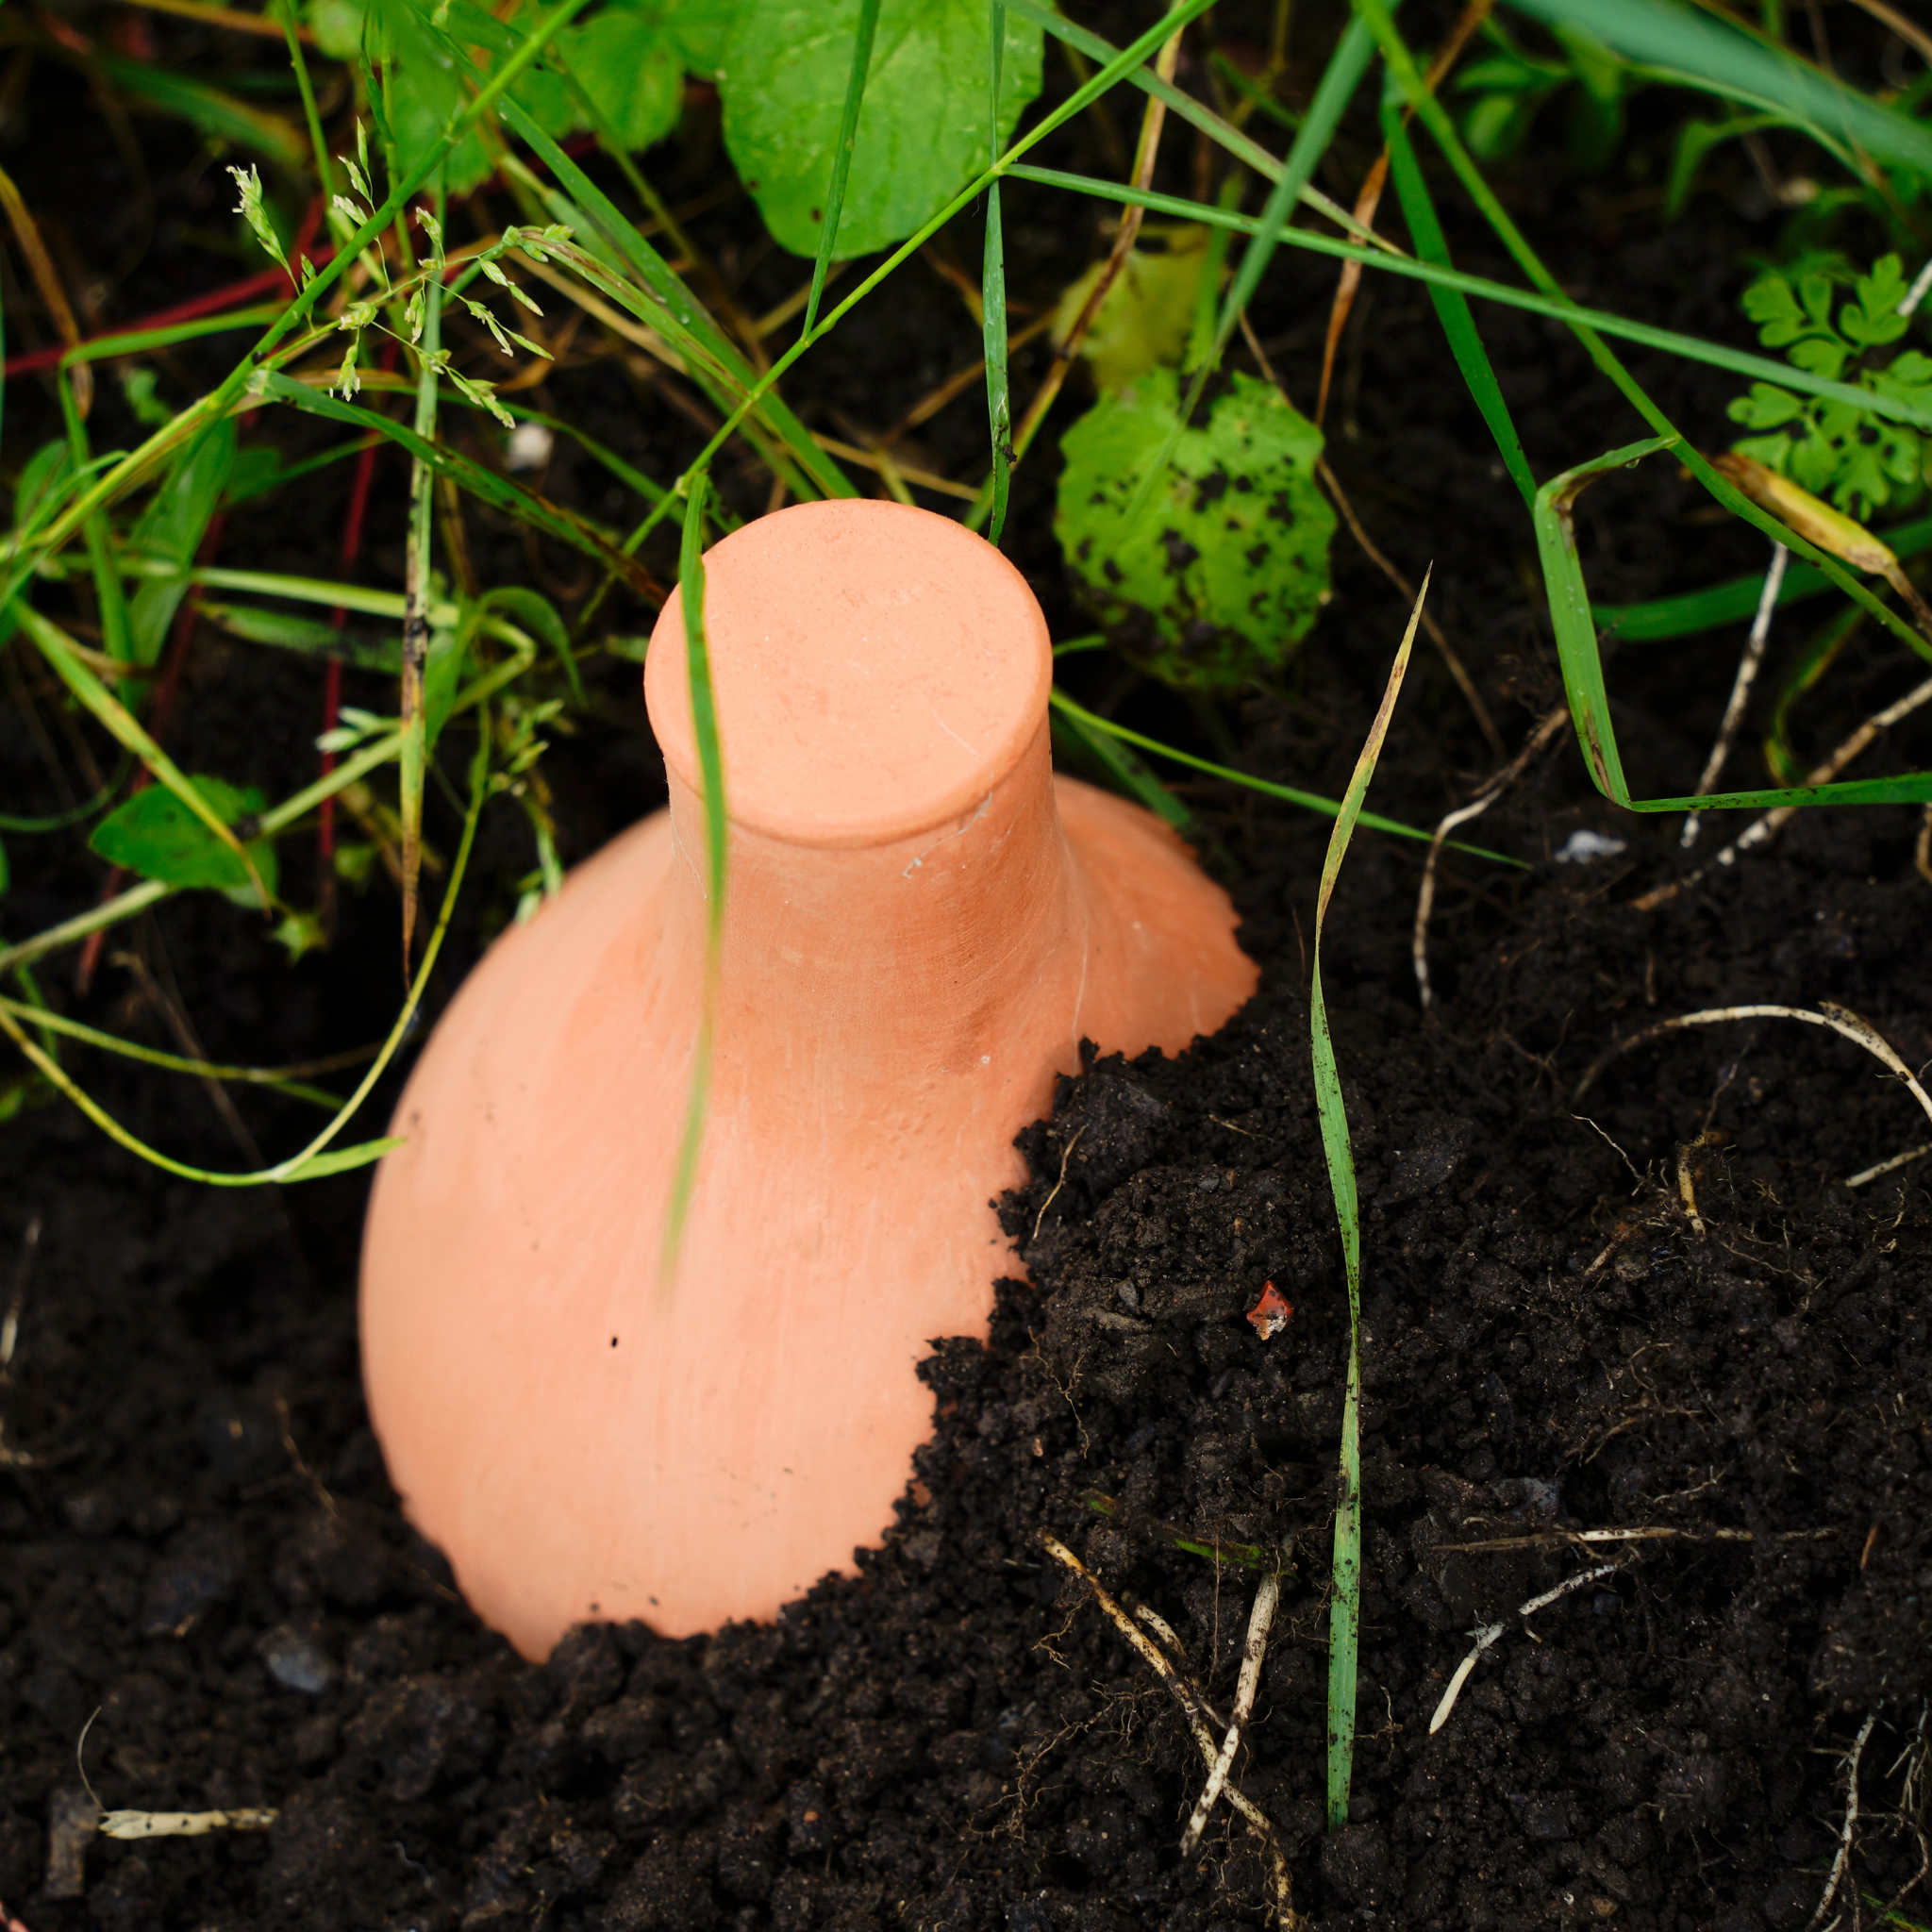 Terracotta Olla in the ground of a garden